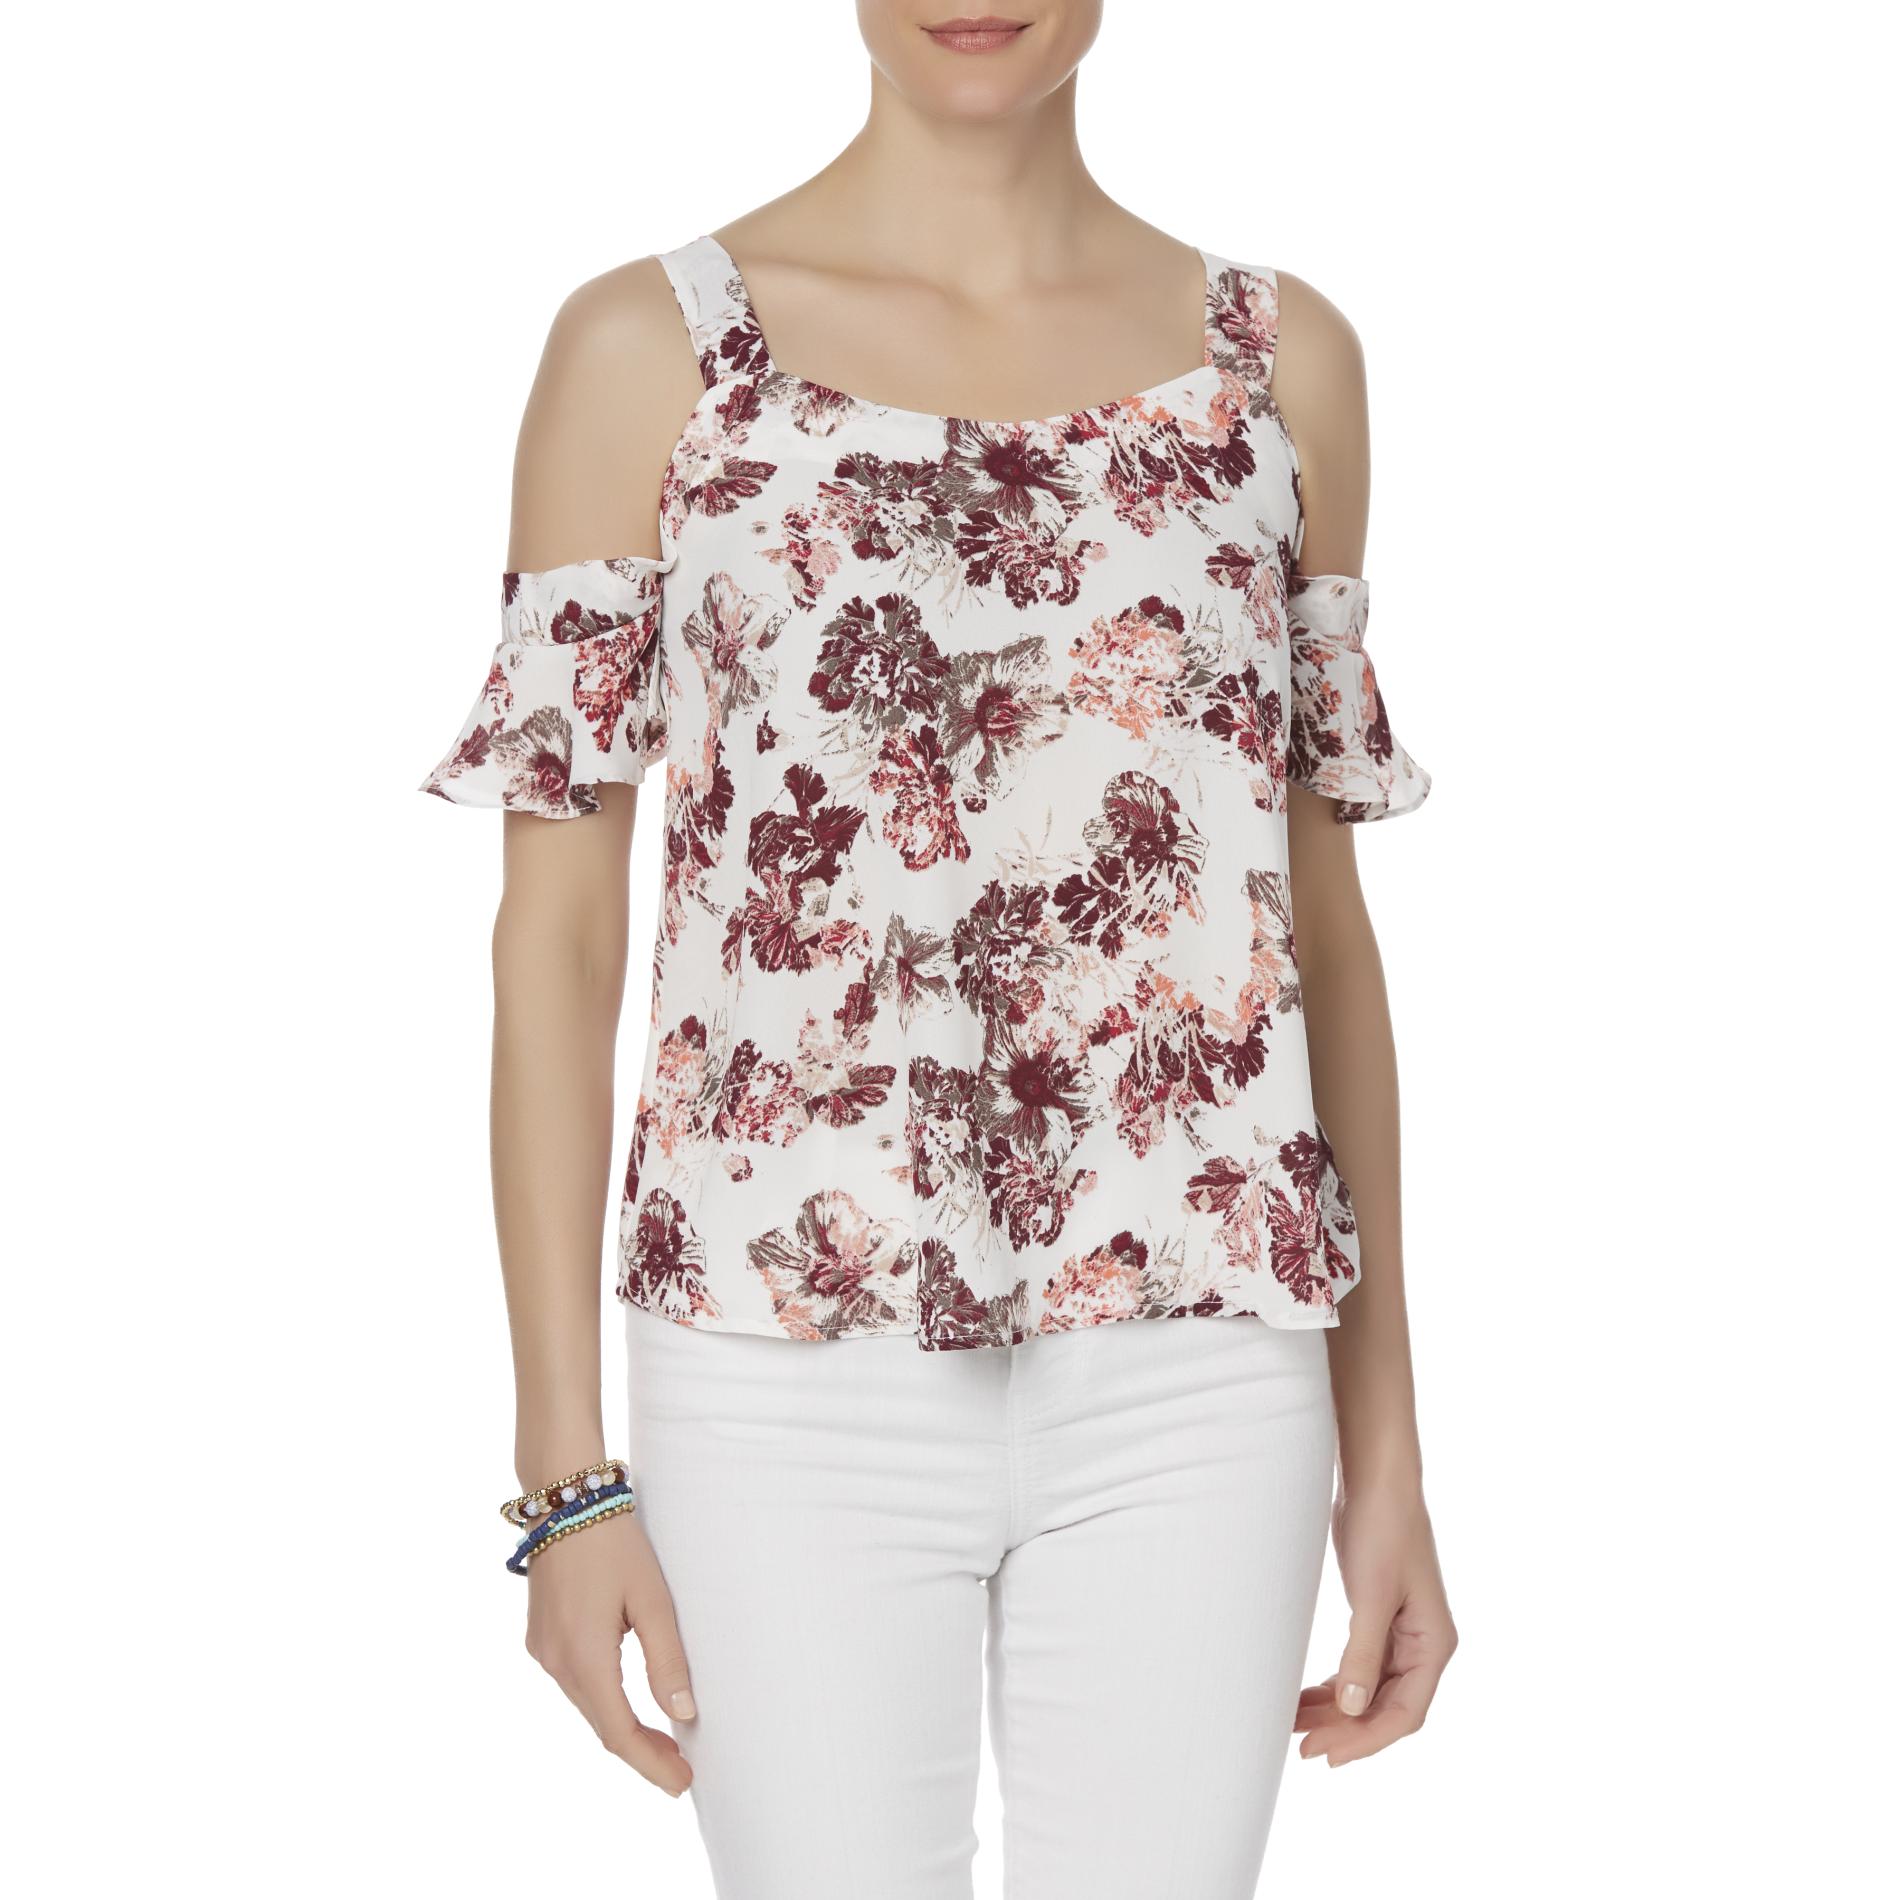 Simply Styled Women's Cold Shoulder Blouse - Floral